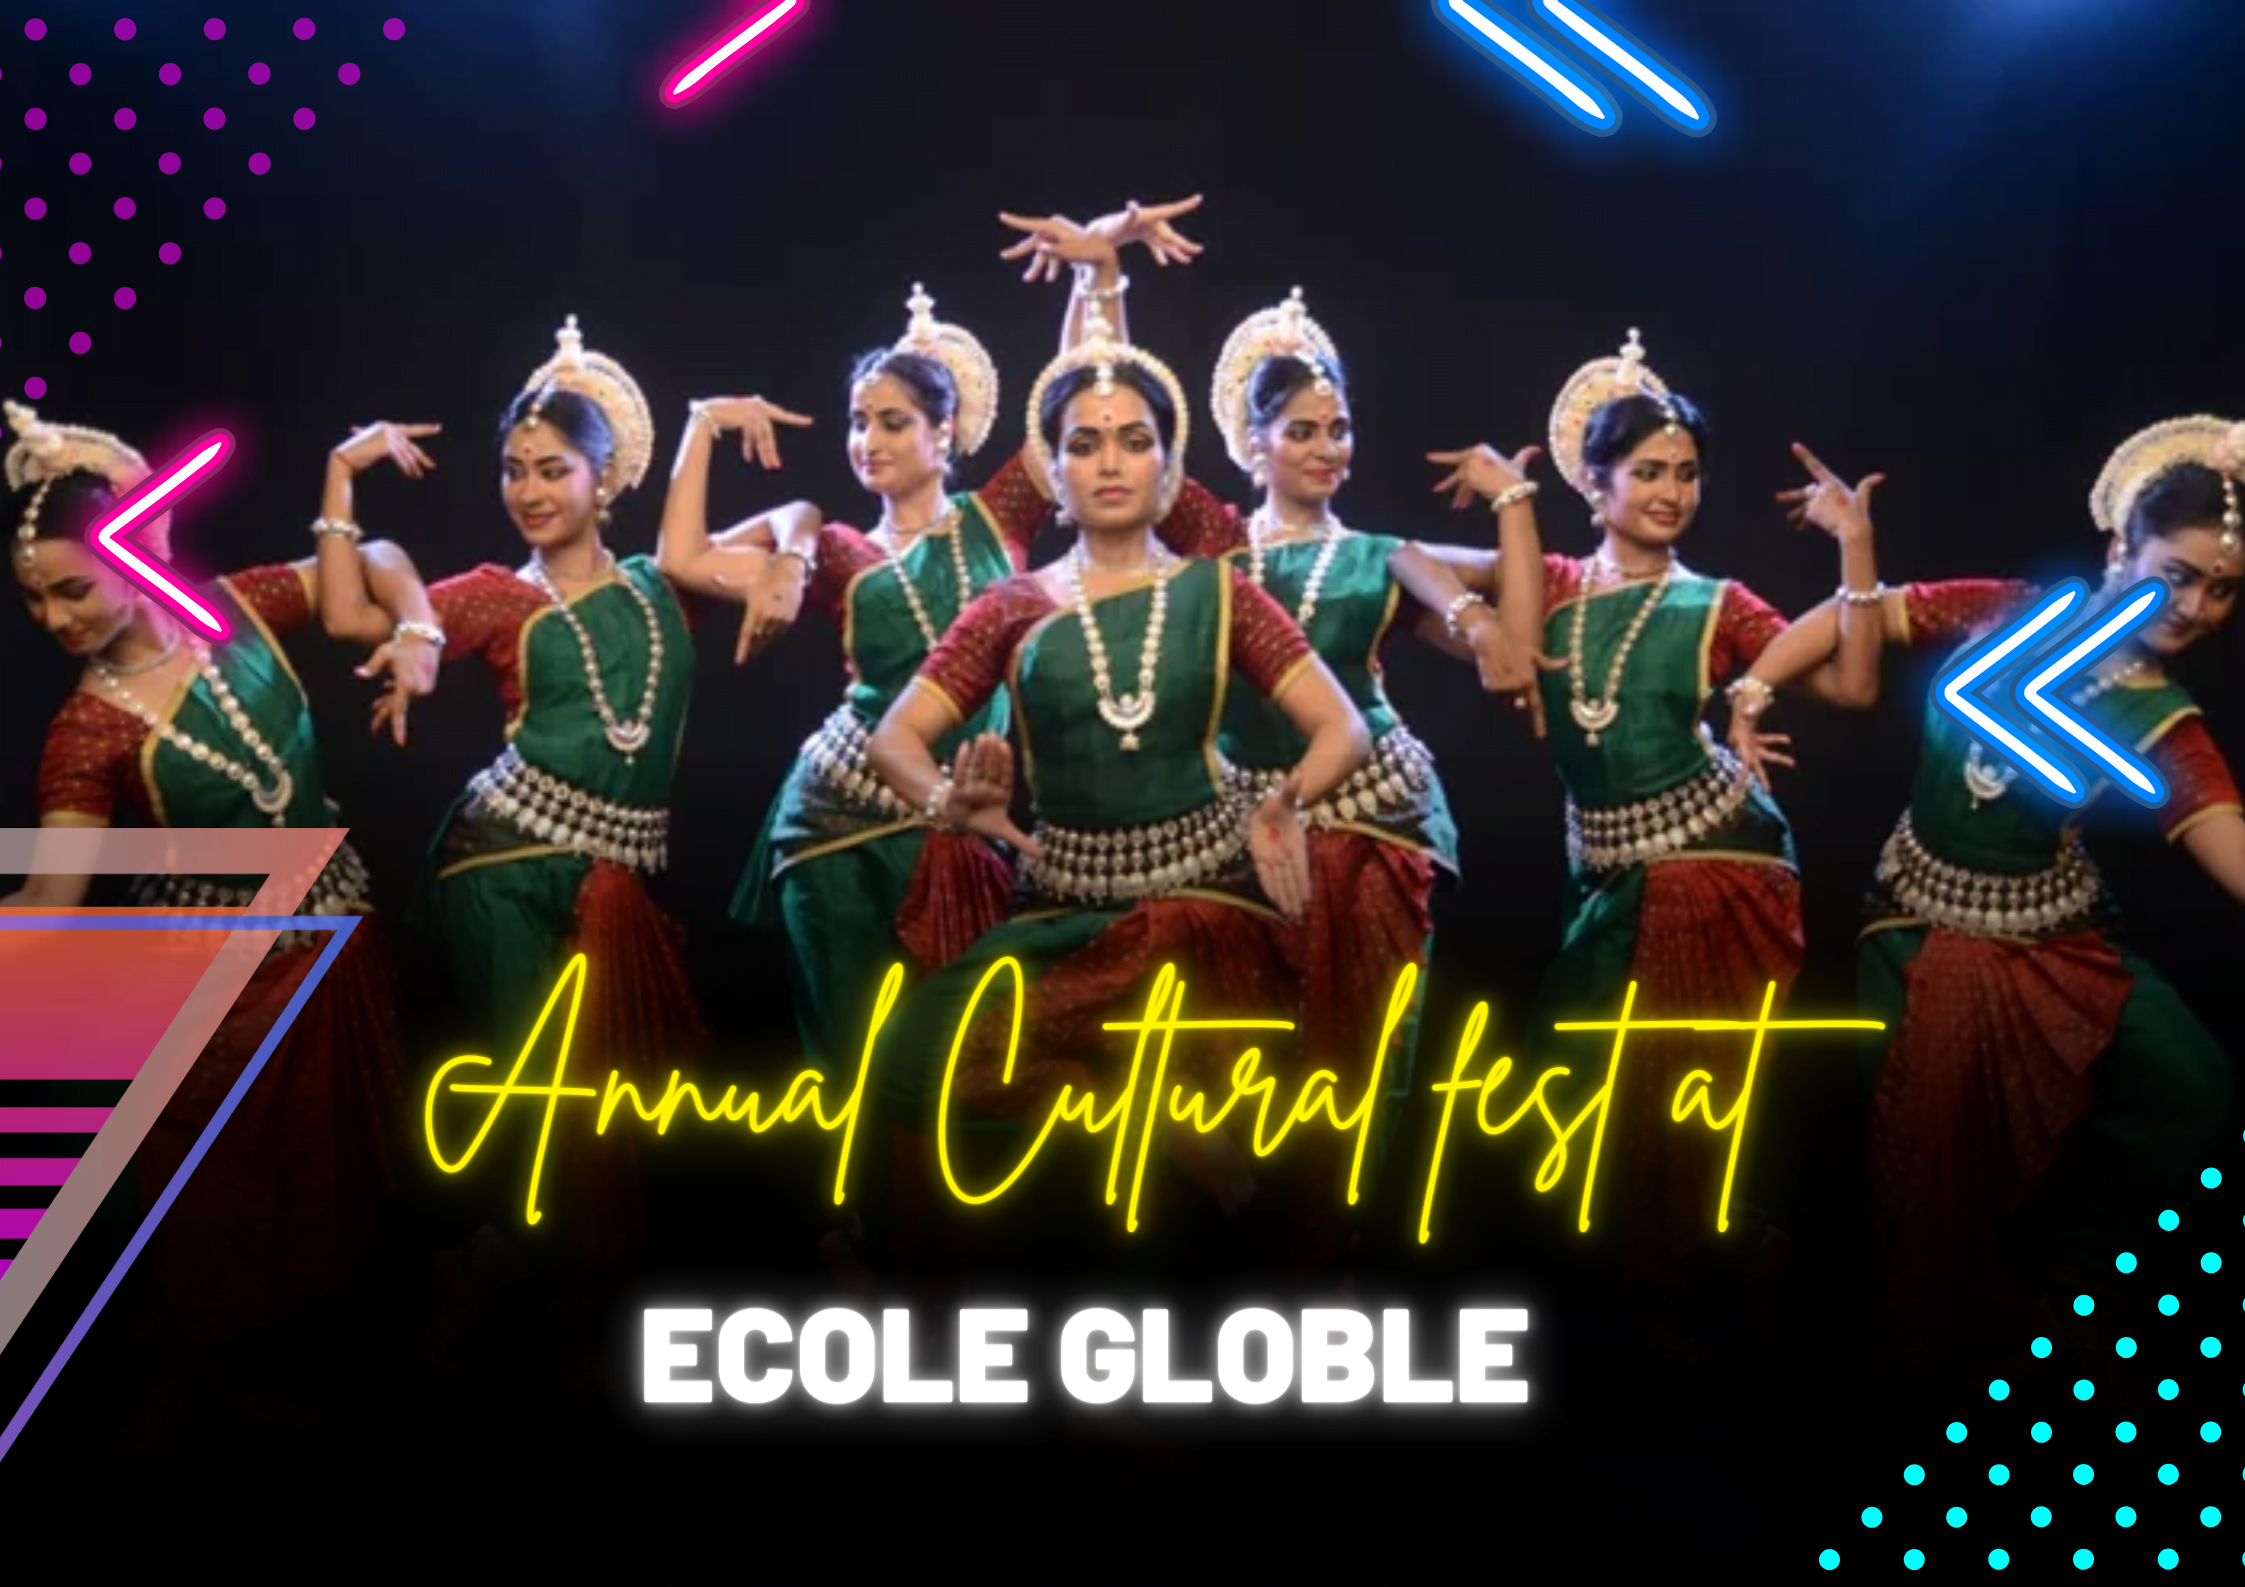 You are currently viewing Ecole Globale’s Annual Cultural Fest: A Mosaic of Talents